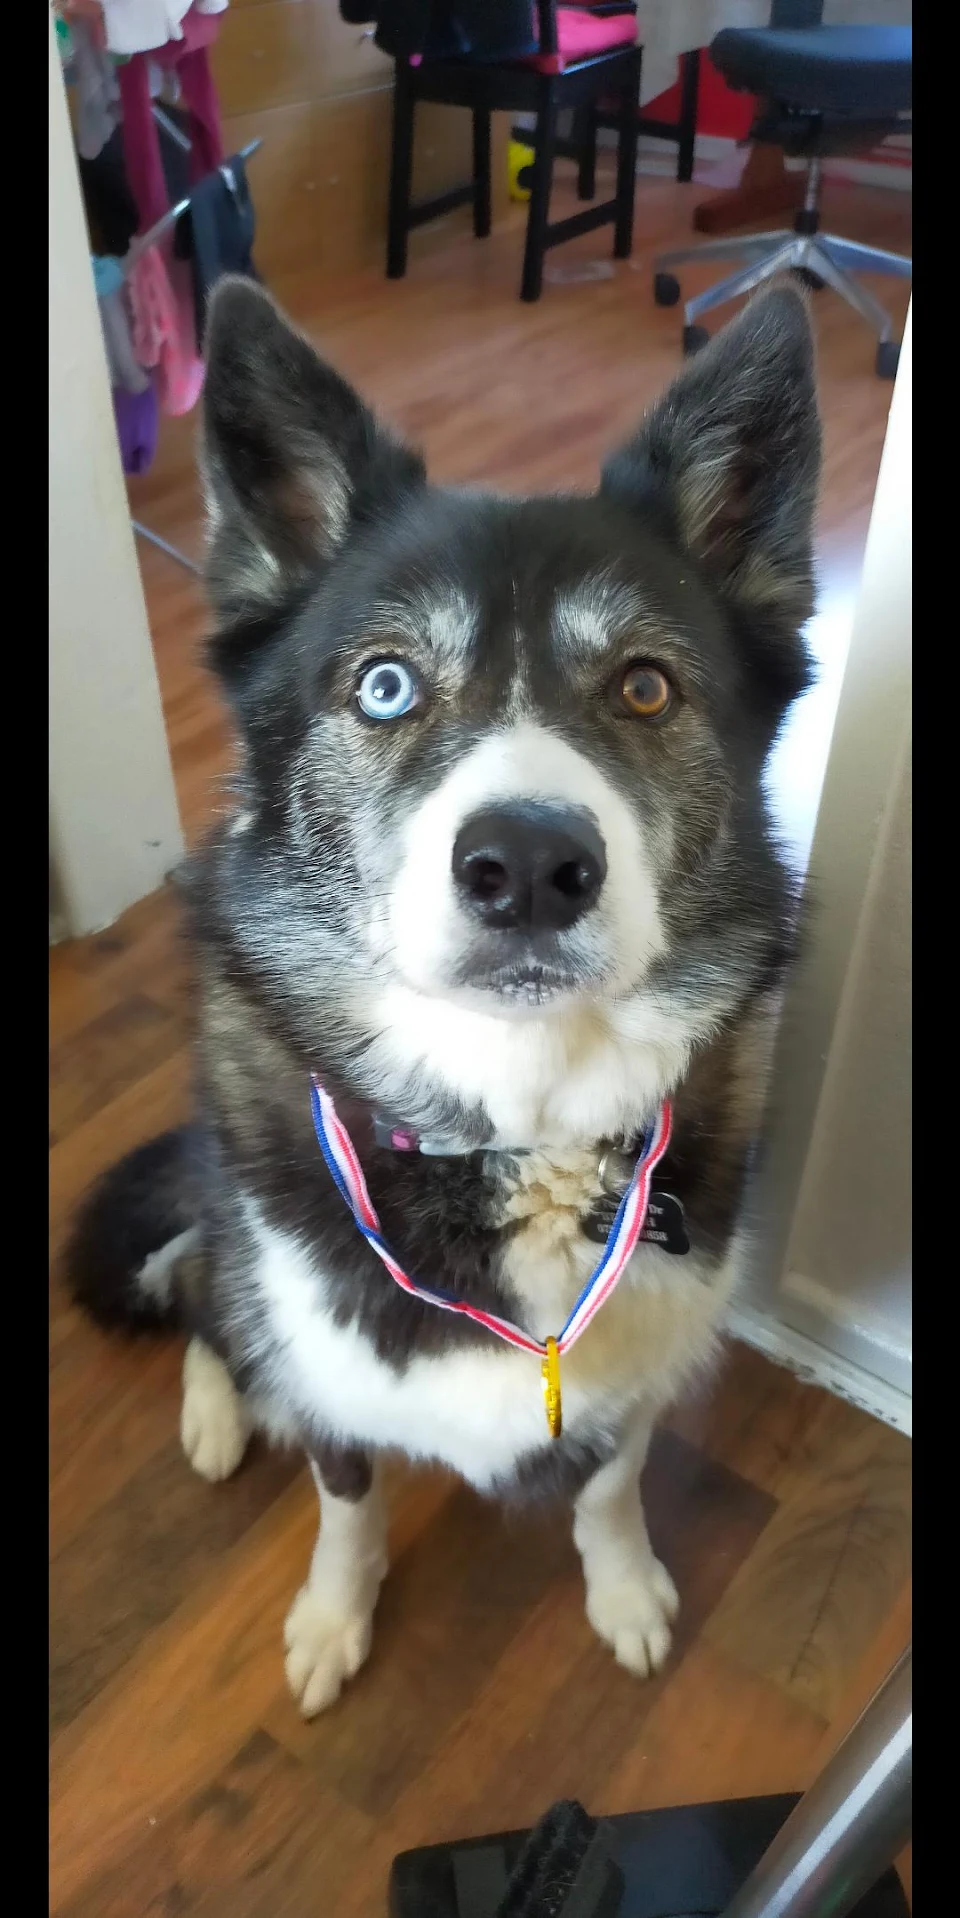 Kid wanted to share her medal with our dog